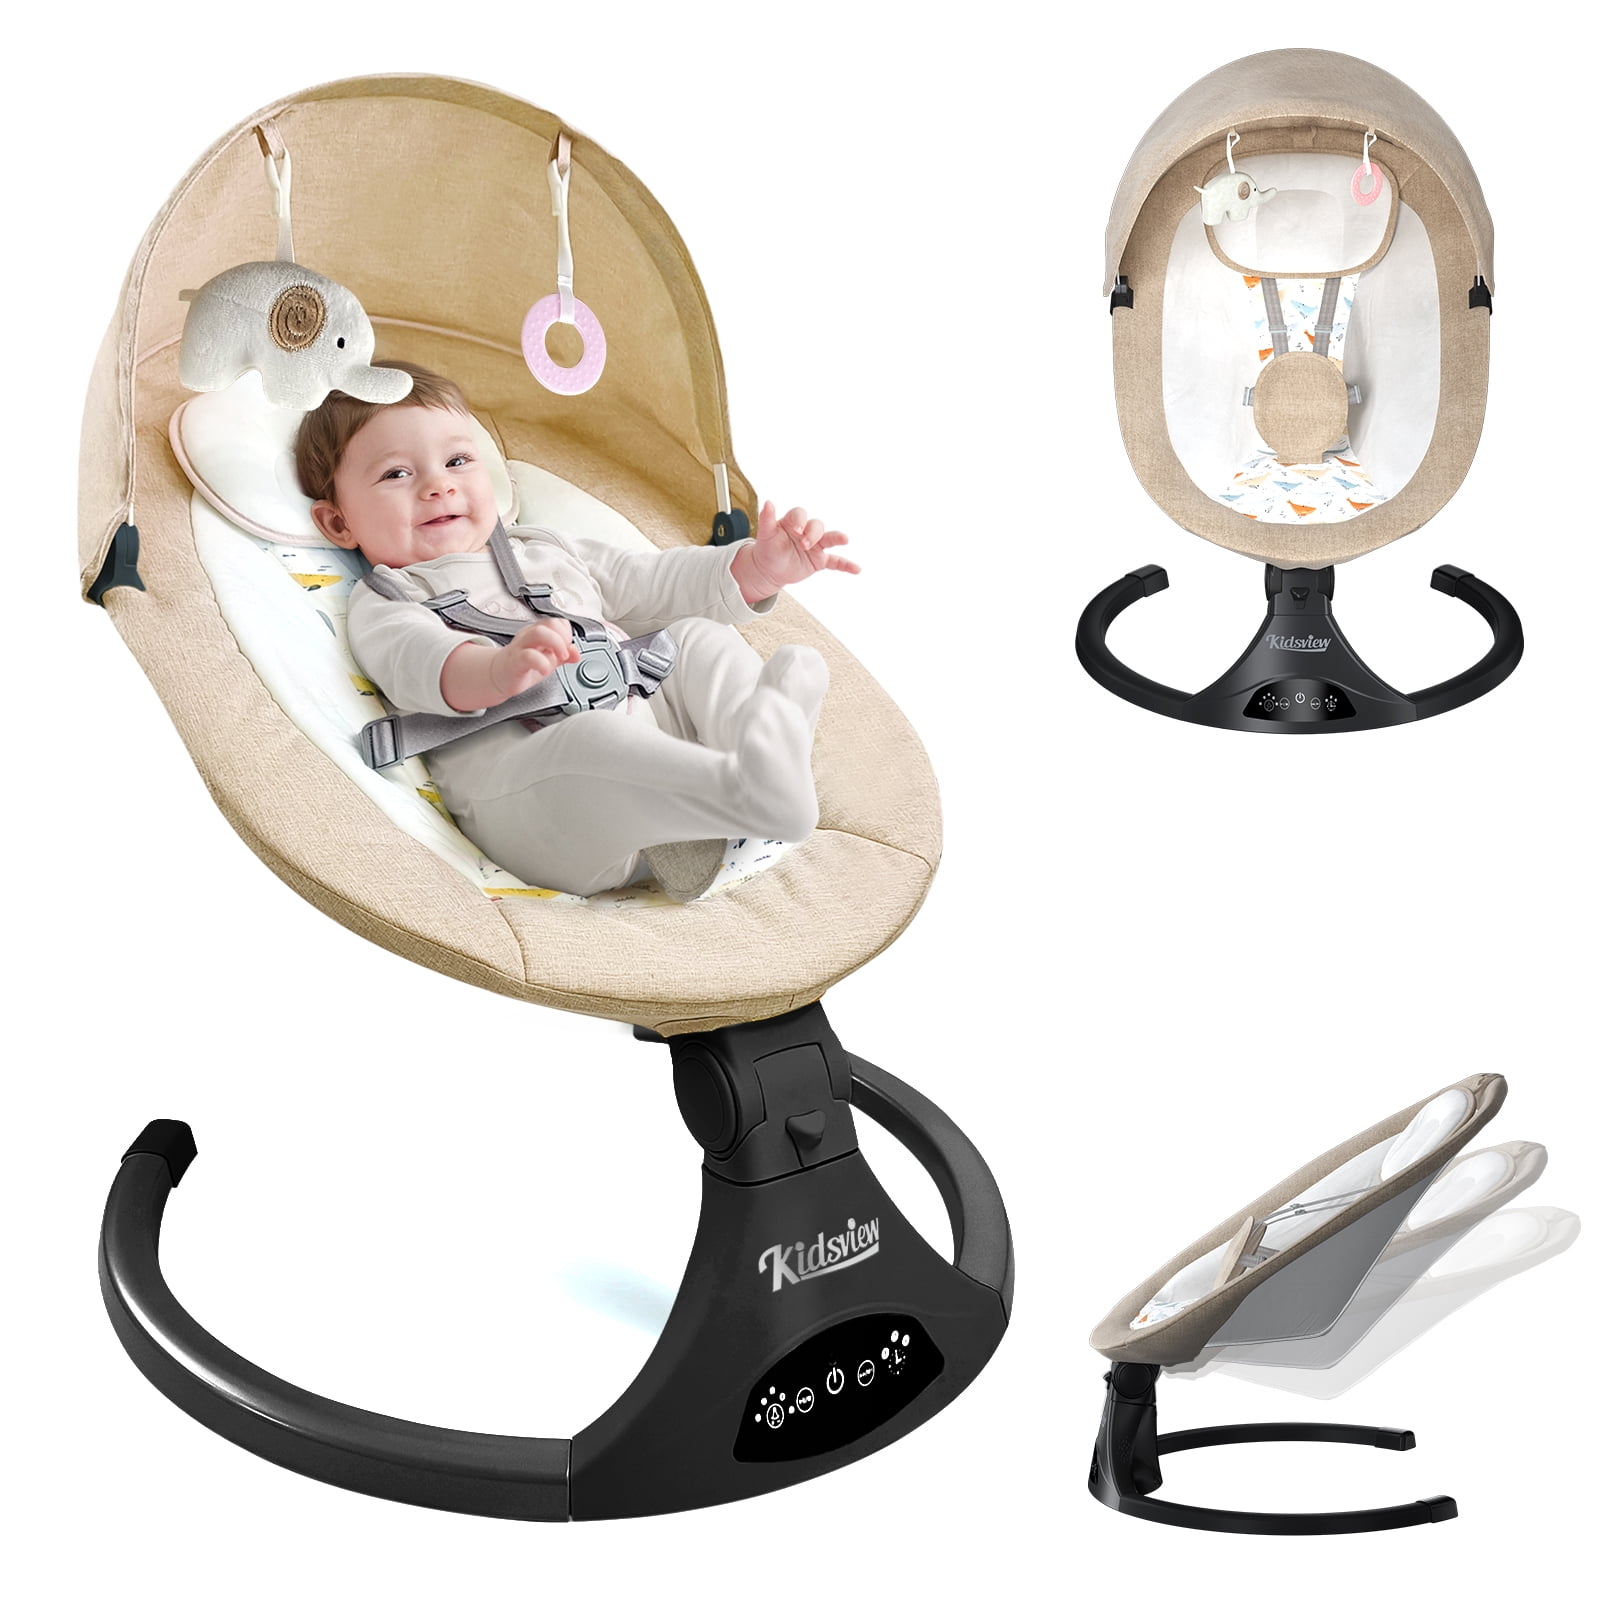 KIDSVIEW Portable 5 Speed Baby Rocker with Music, Remote Control, and Touch  Screen for Infants - Suitable for 0-9 Months, 5-20 lbs, Gray